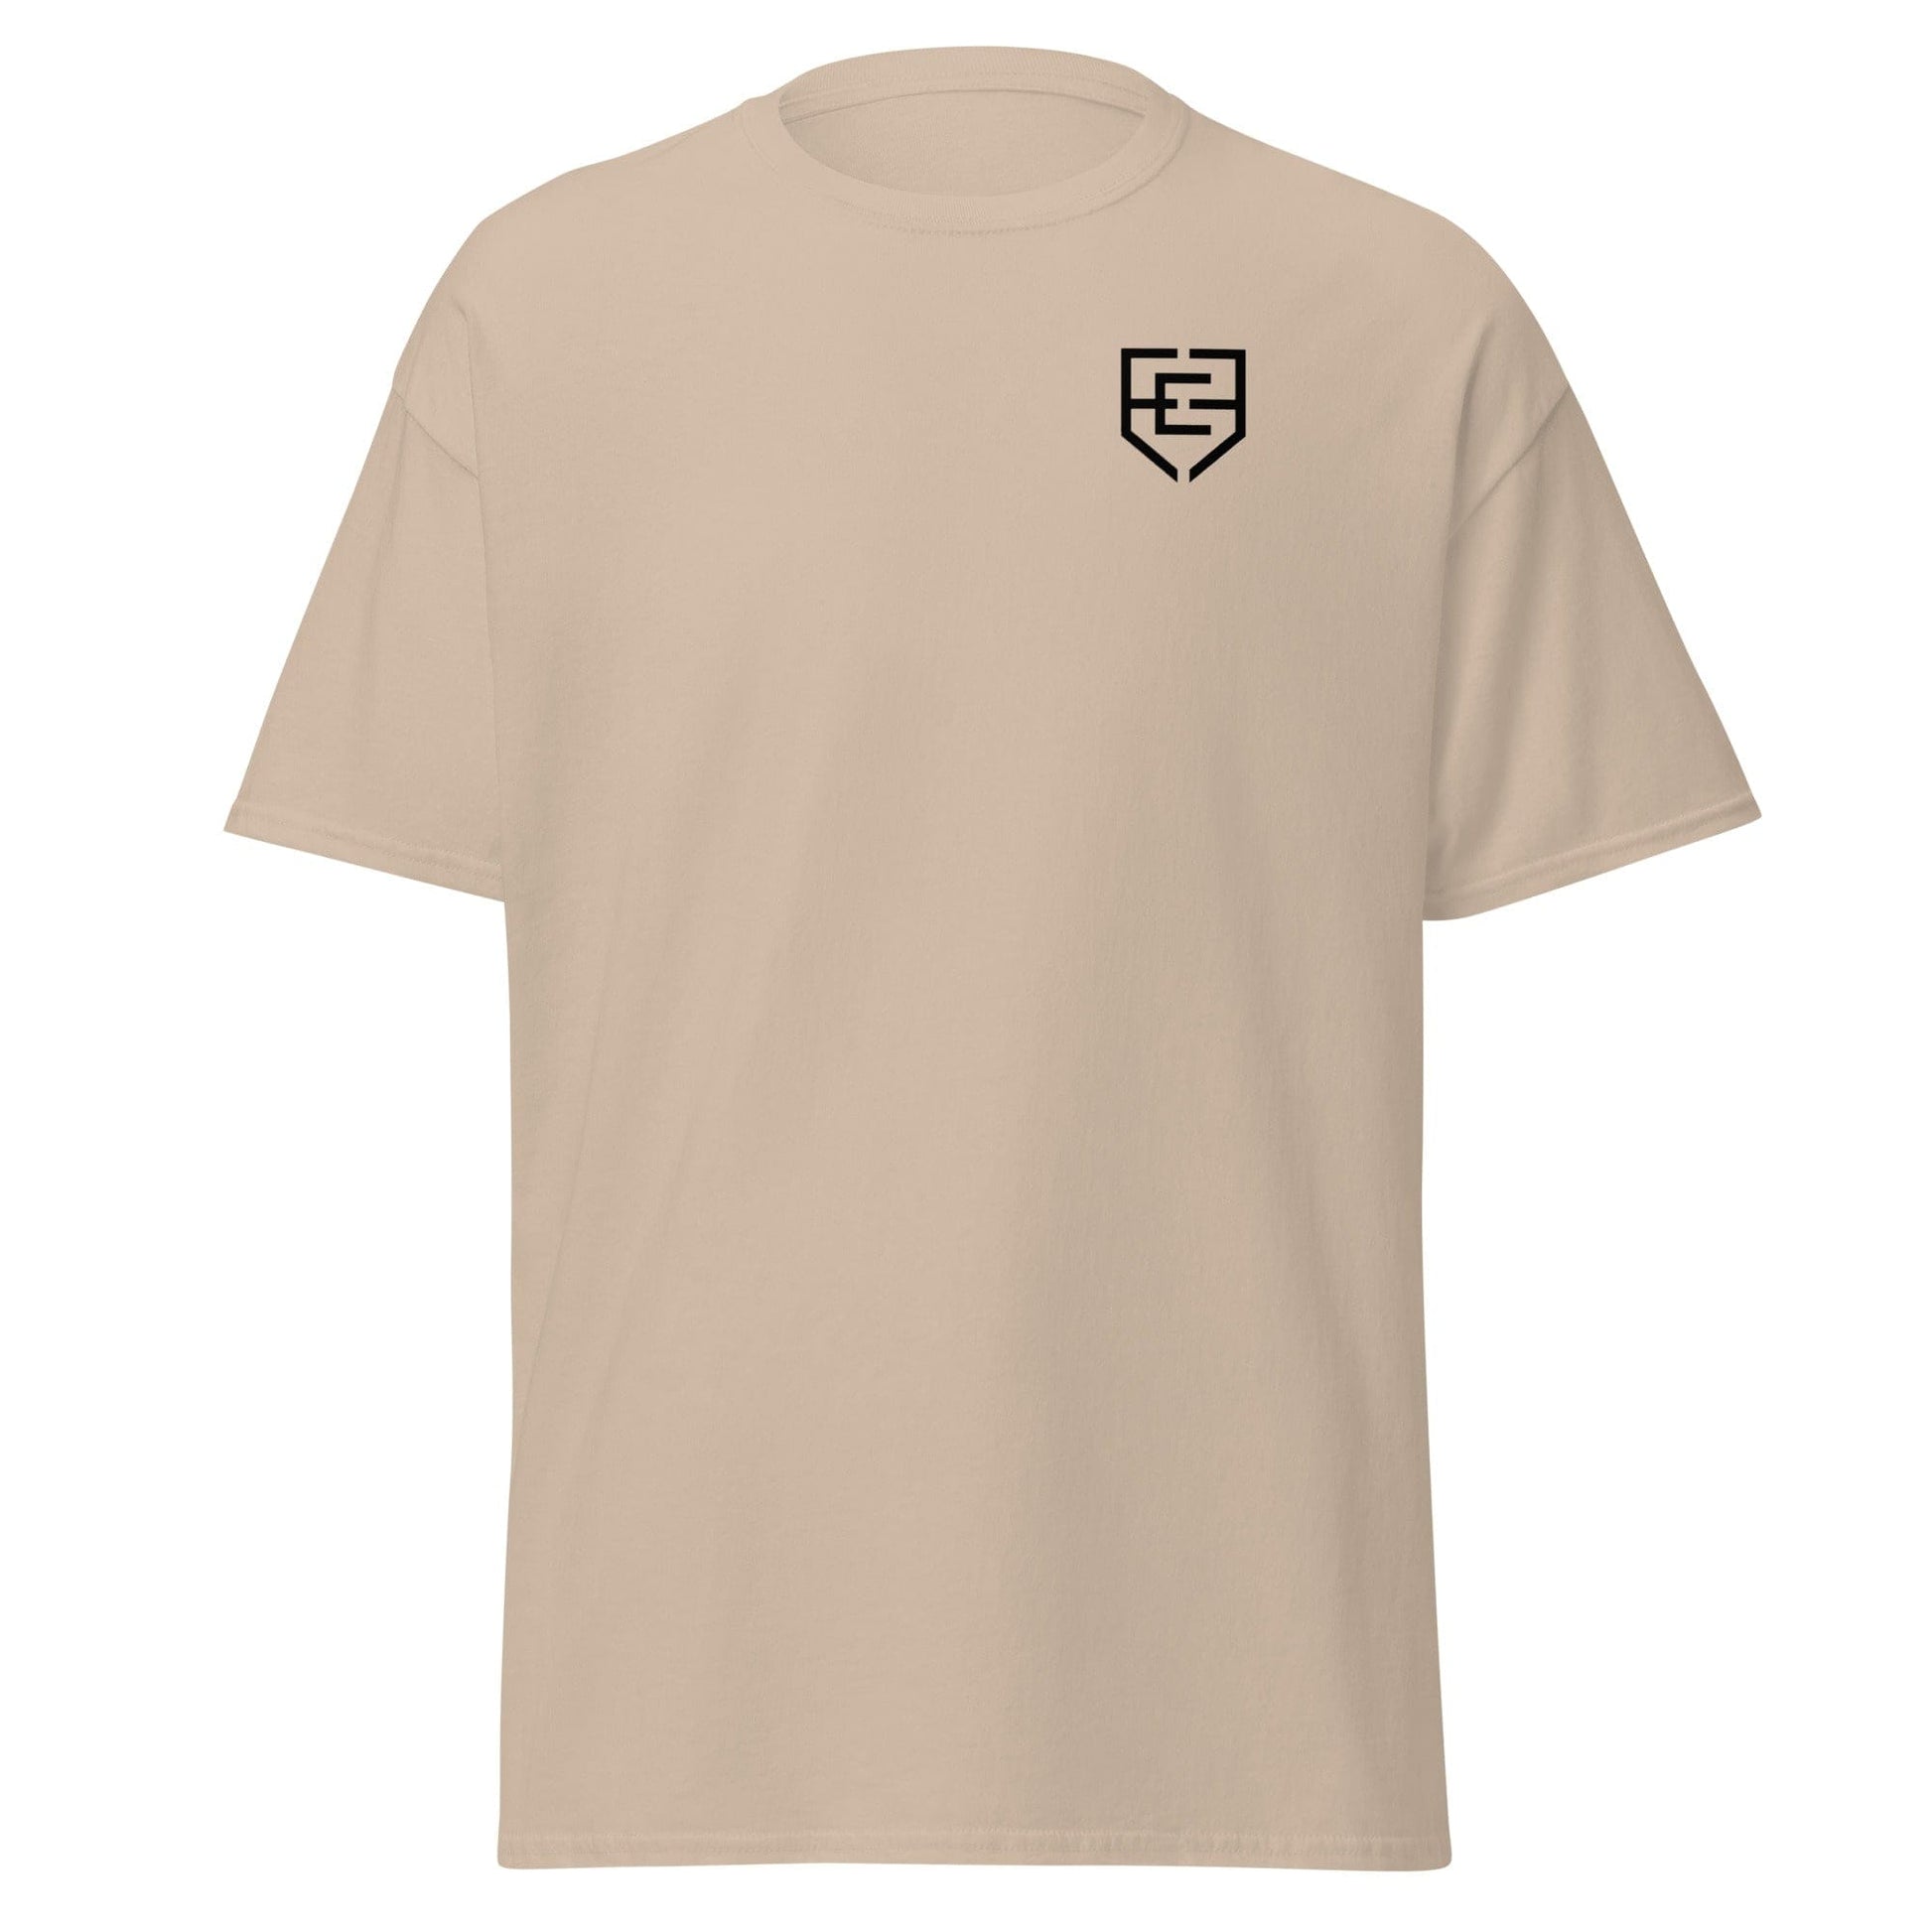 The Evolution Classic Shirt is a versatile and stylish shirt that is perfect for any occasion. Made from high-quality, durable materials, this shirt is designed to p